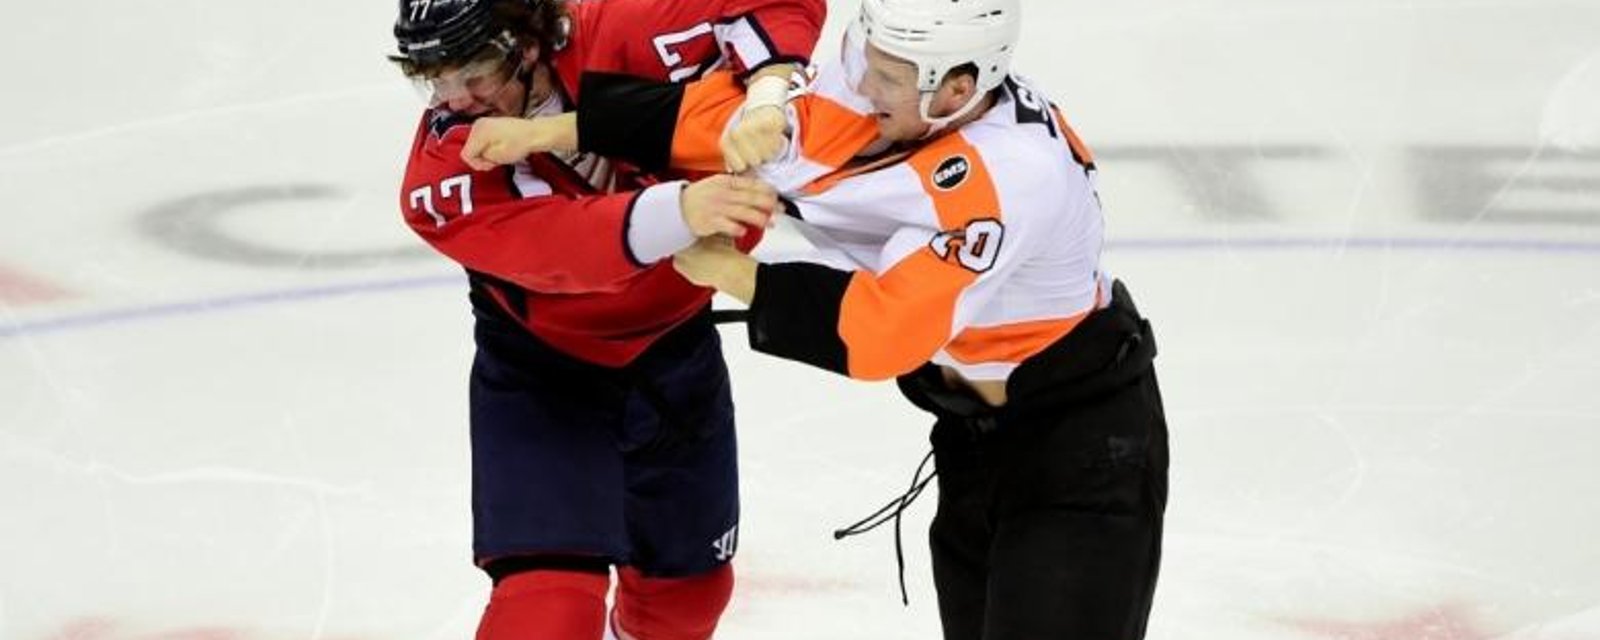 Oshie fought a bigger man because it 'had to be done'.